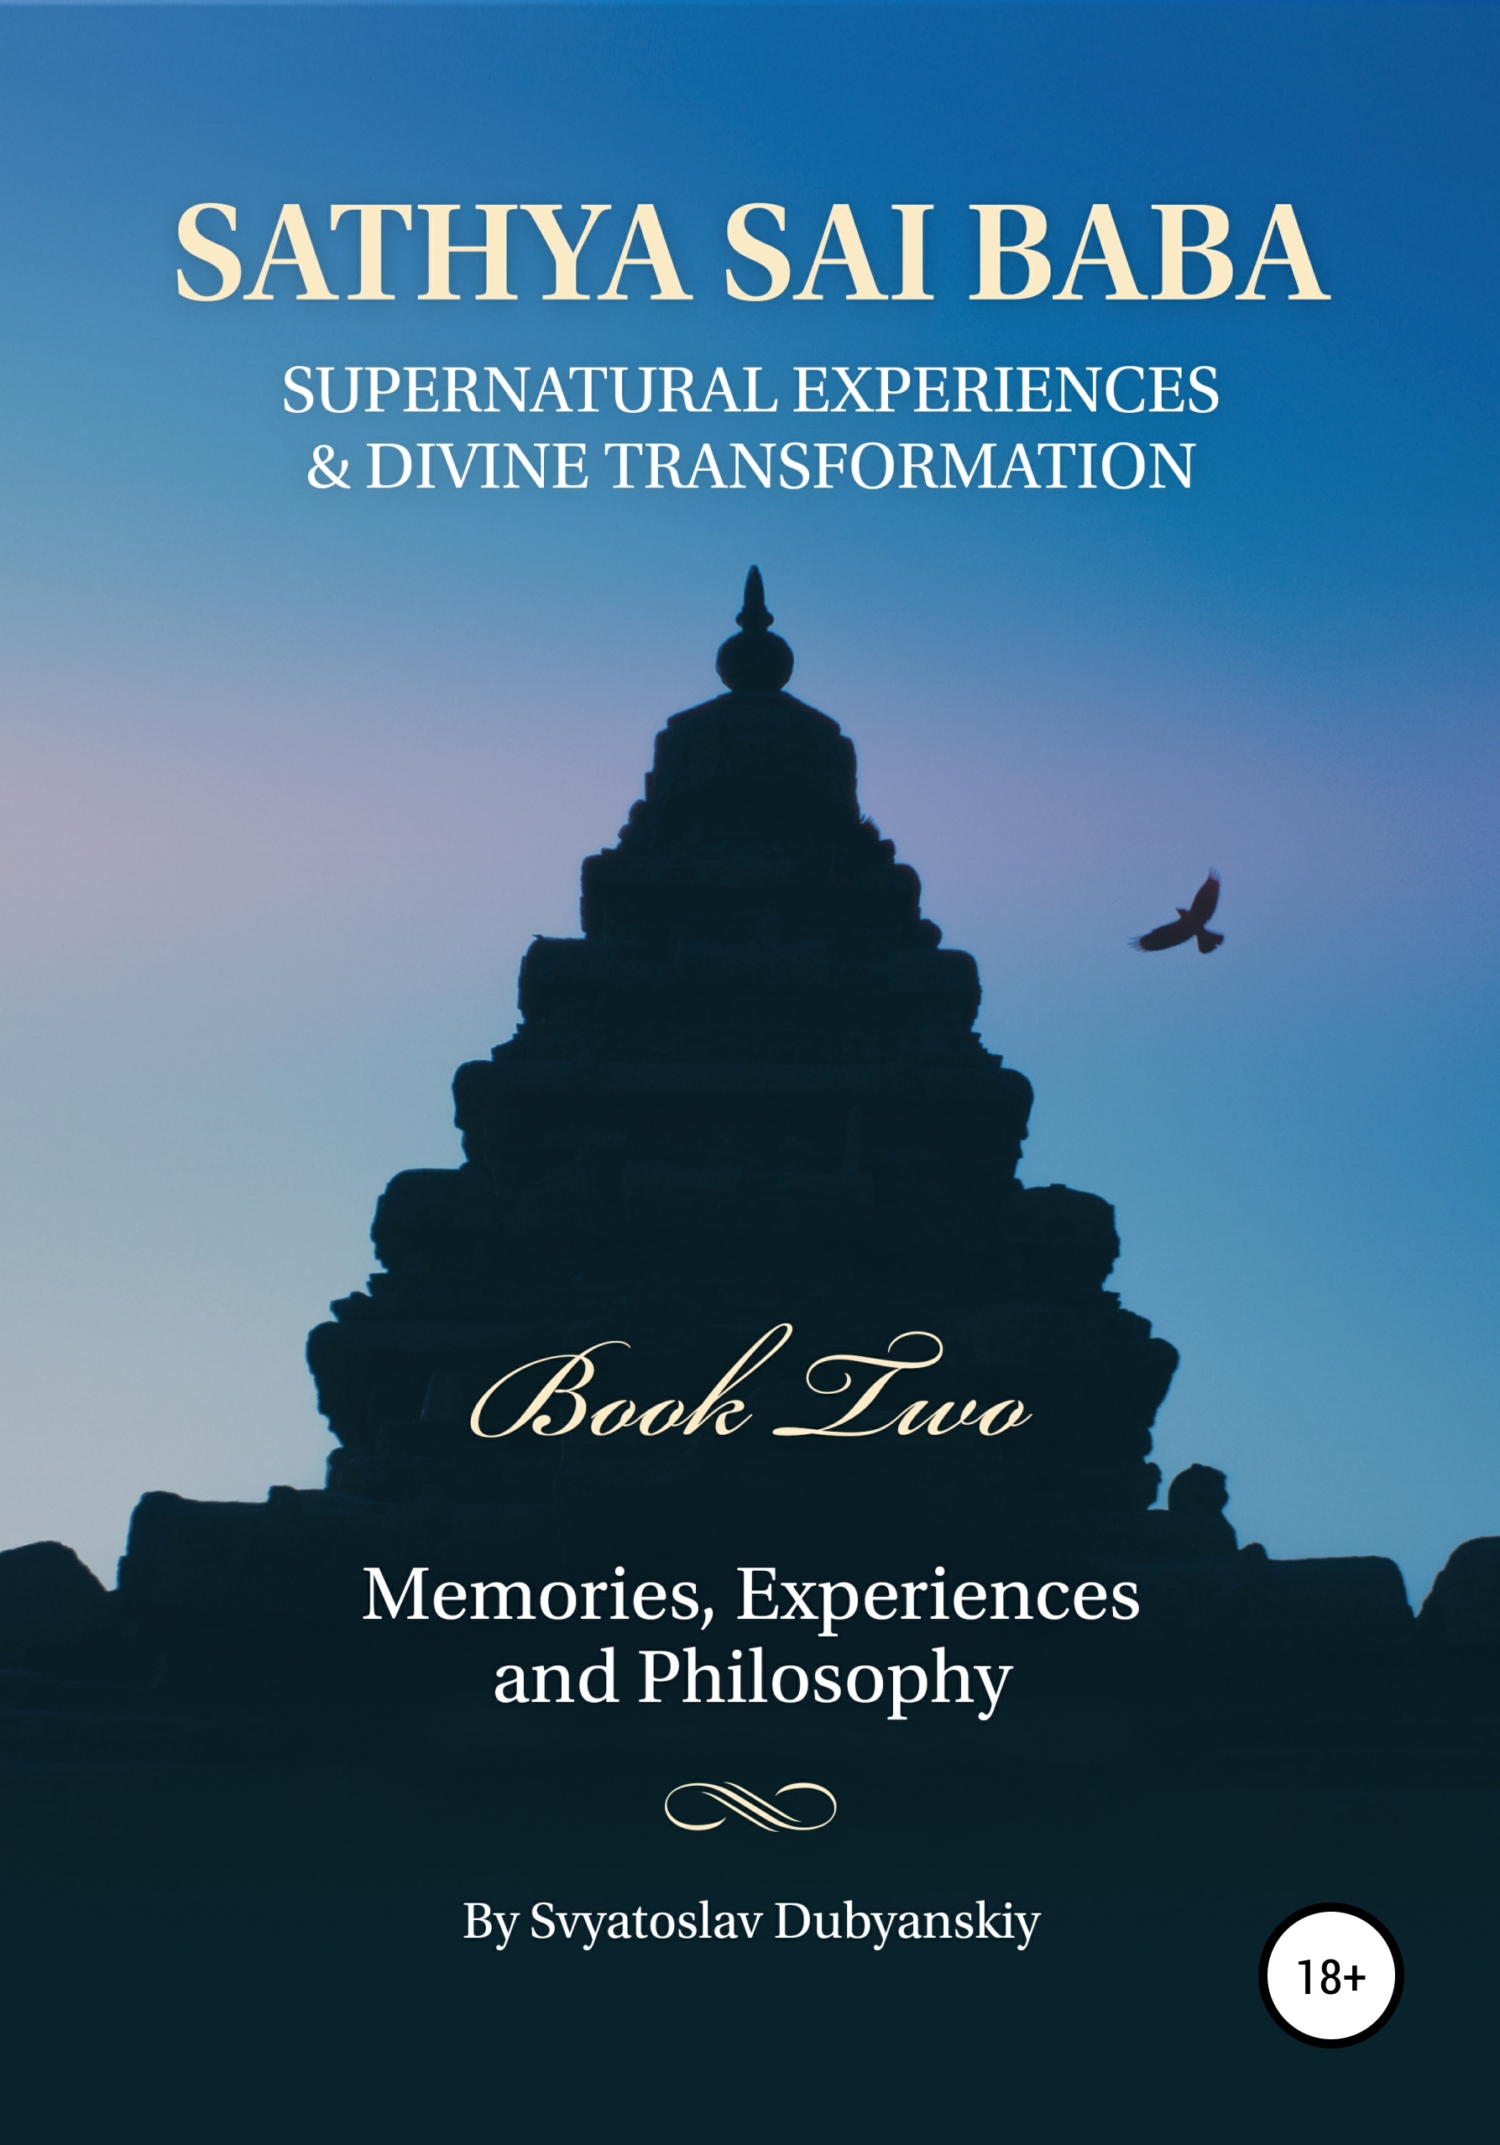 Sathya Sai Baba. Supernatural Experiences and Divine Transformation. Book Two (fb2)